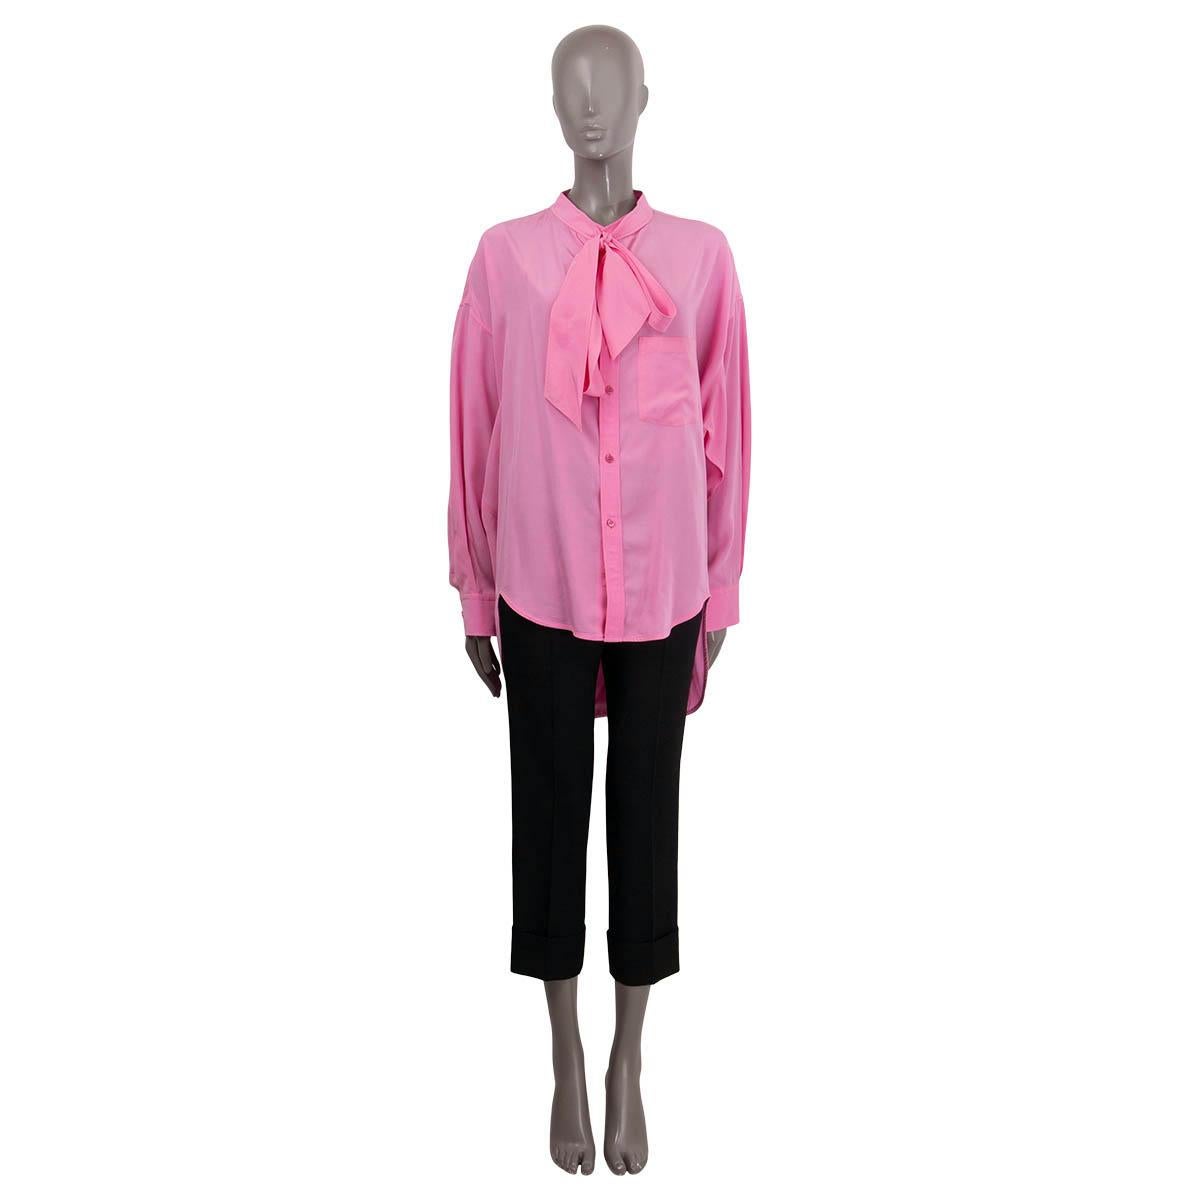 100% authentic Balenciaga 'New Swing' oversized shirt in bubblegum pink lyocell (100%). Features a logo print on the back, high-low hem line, buttoned cuffs and a chest-pocket. Has been worn and is in excellent condition. 

Measurements
Tag